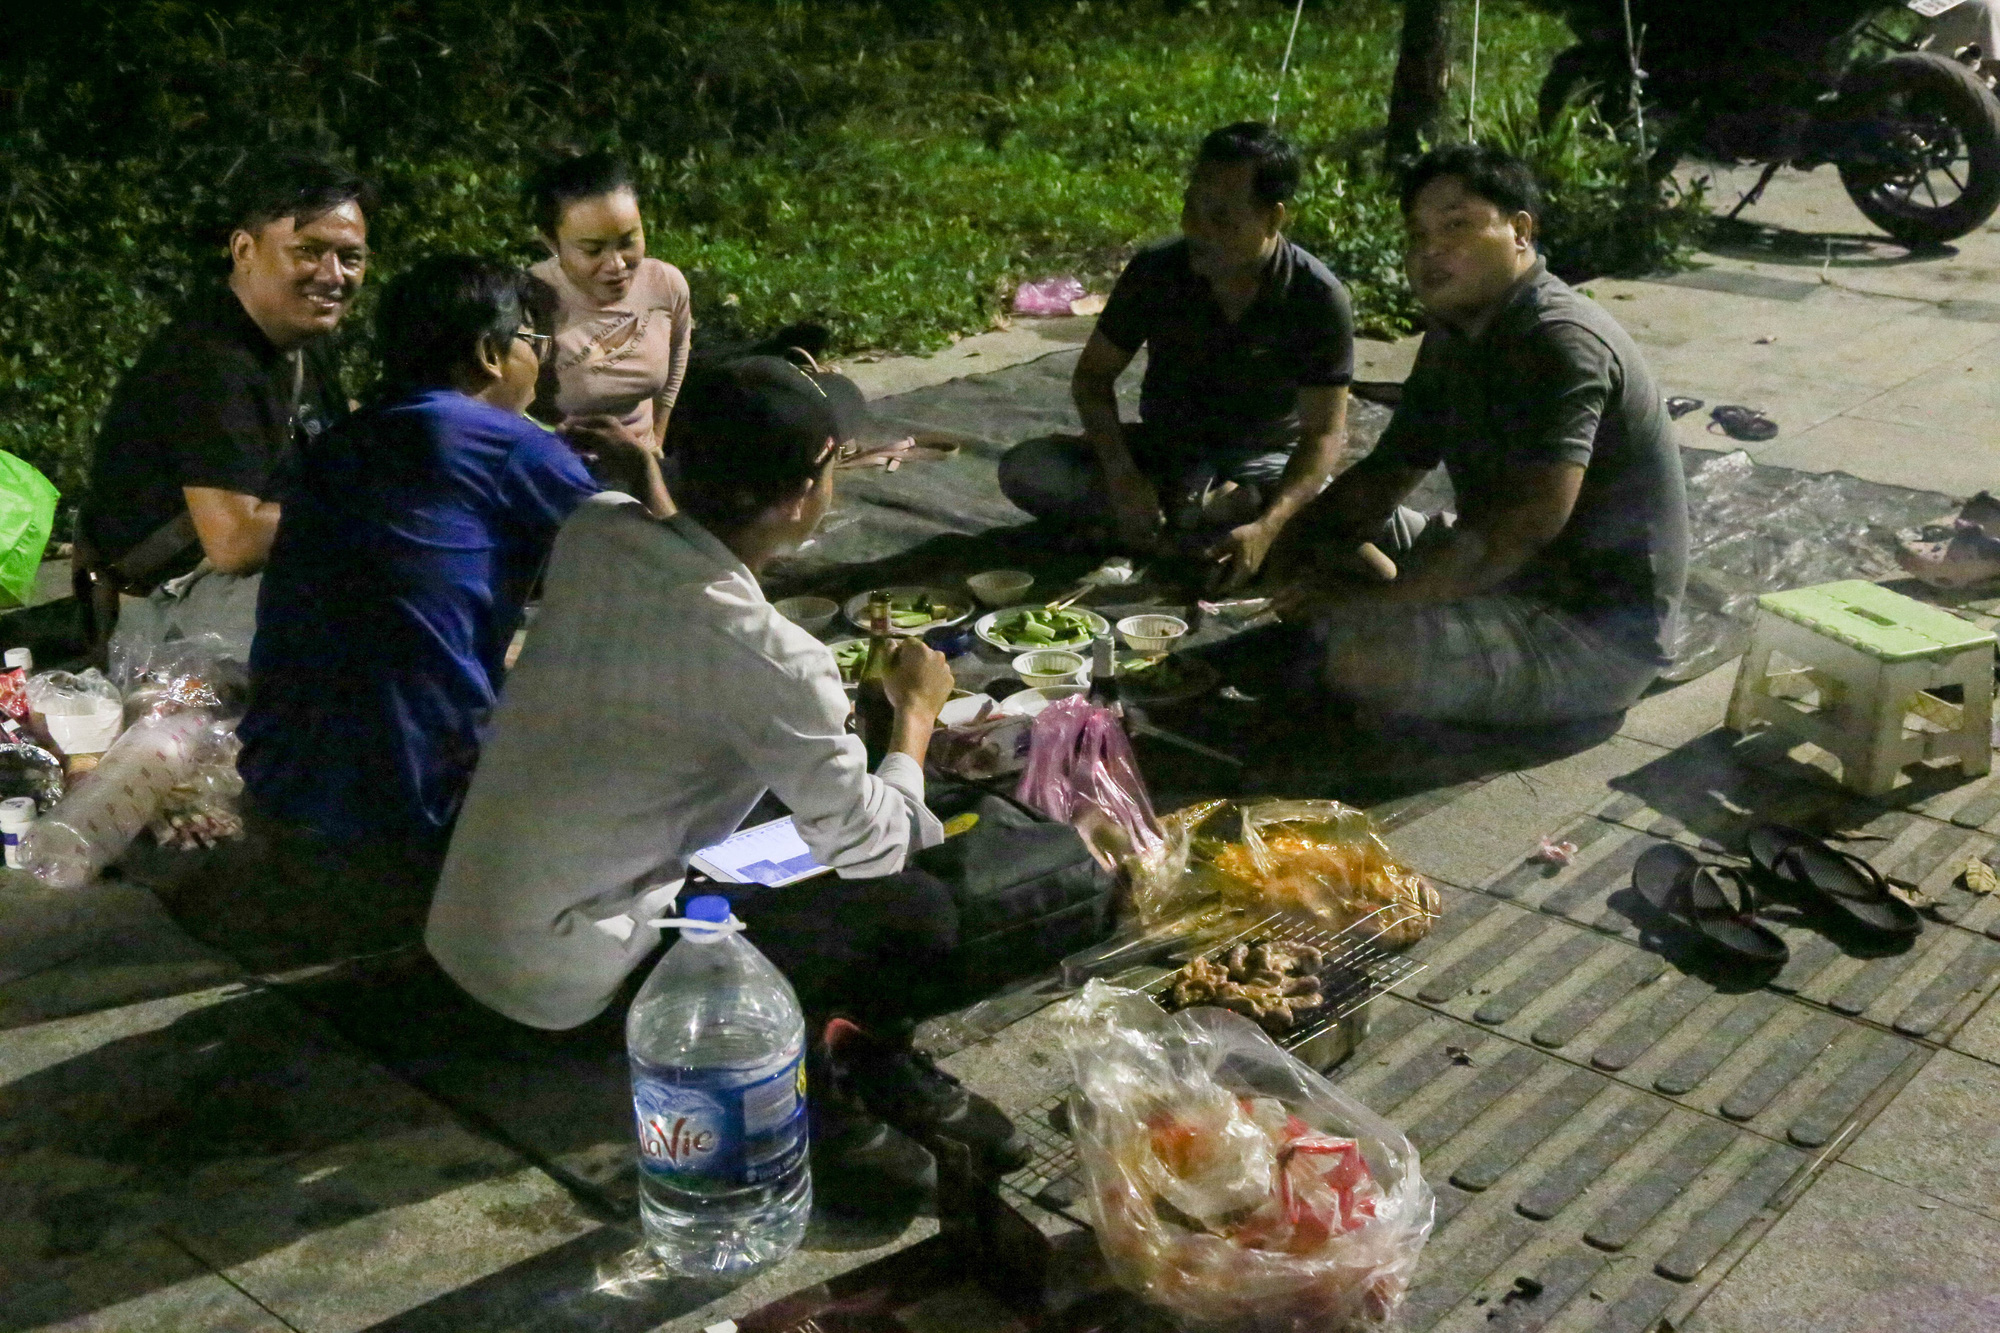 A group of young people throw a BBQ party on the sidewalk in the Thu Thiem New Urban Area. Photo: Thao Le / Tuoi Tre